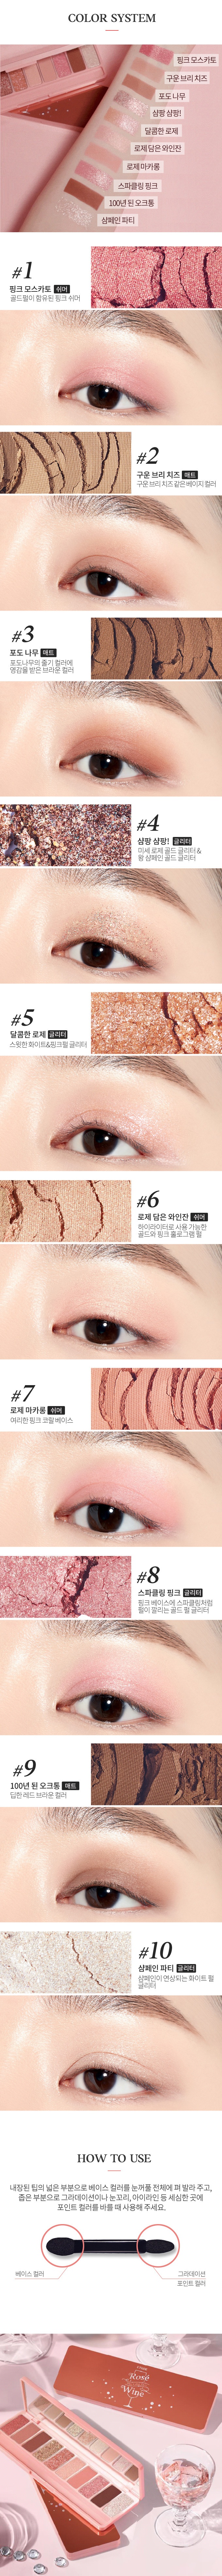 Etude House Play Color Eyes Rose Wine Eye Palette korean cosmetic makeup product online shop malaysia macau thailand3